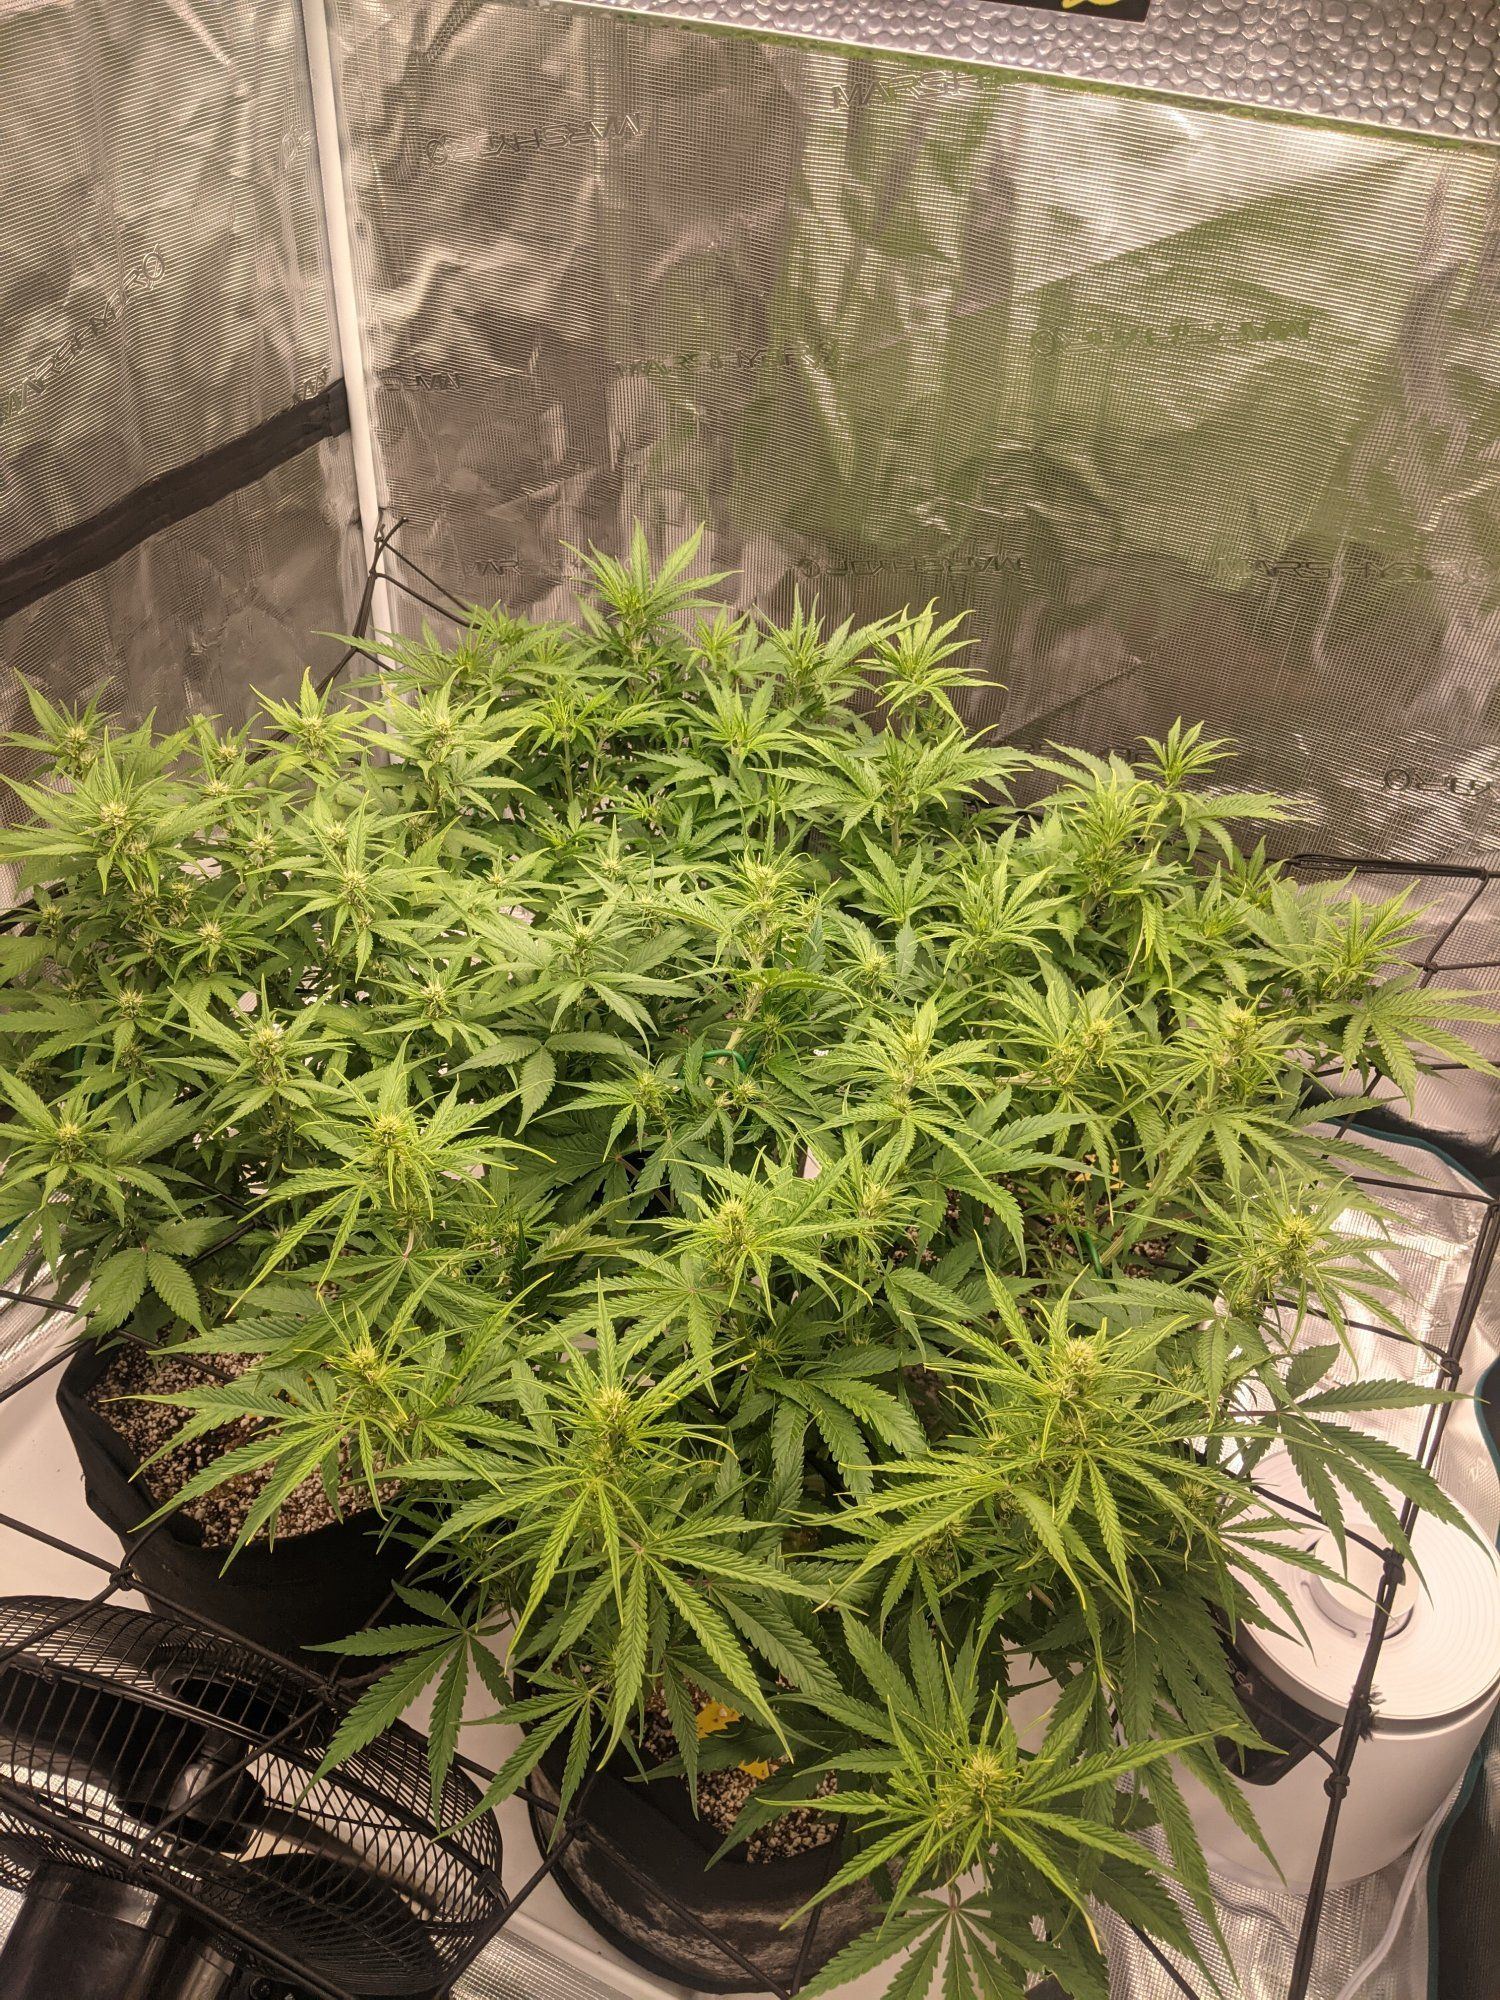 Week 5 from sprout on autoflower for defoilate or not first grow